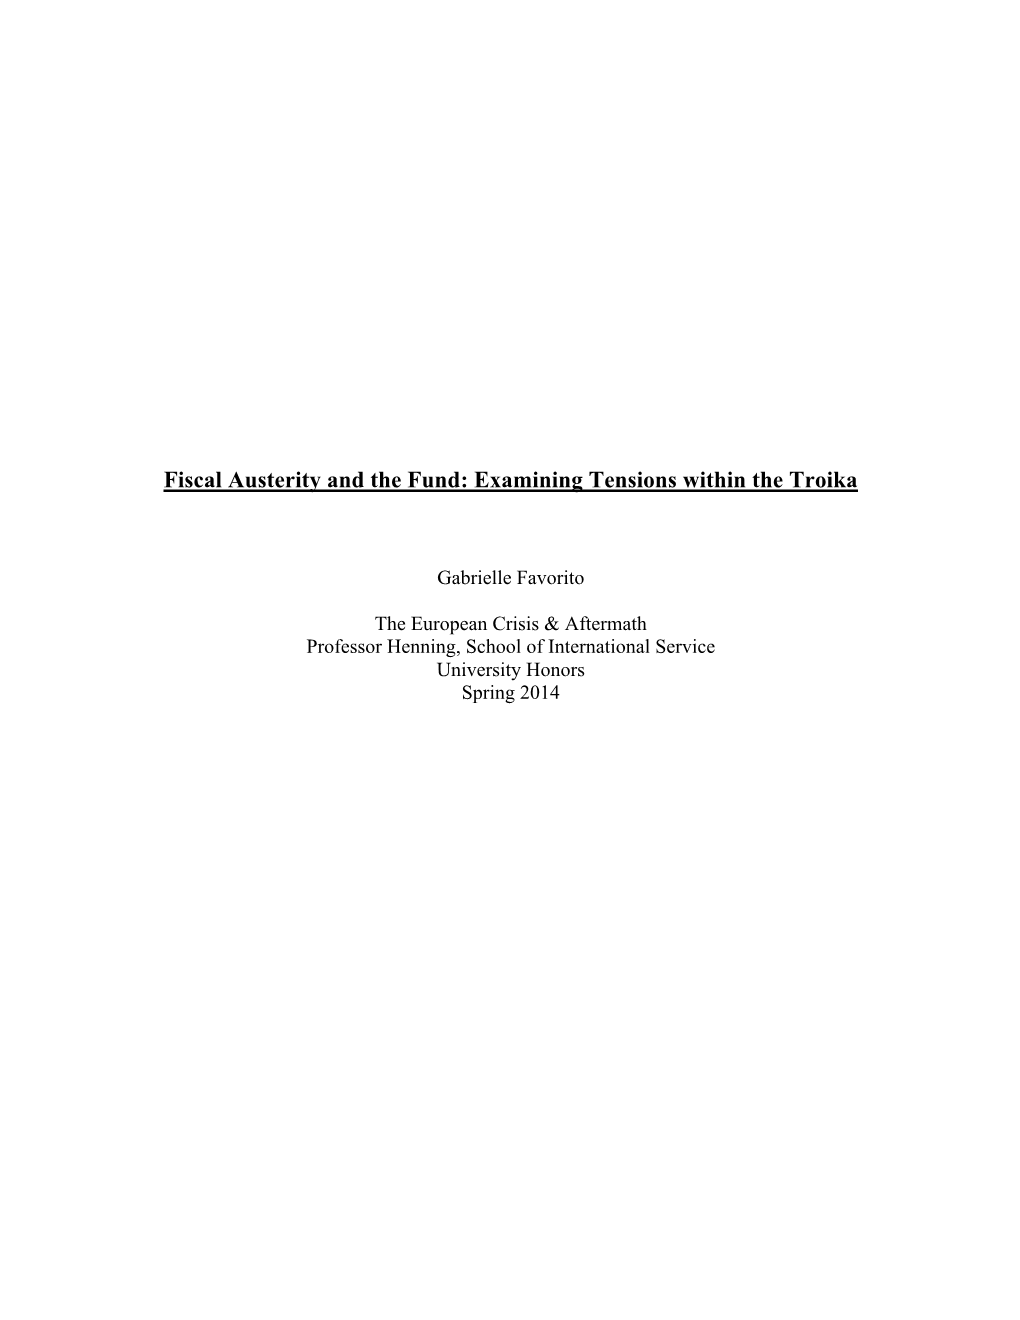 Fiscal Austerity and the Fund: Examining Tensions Within the Troika